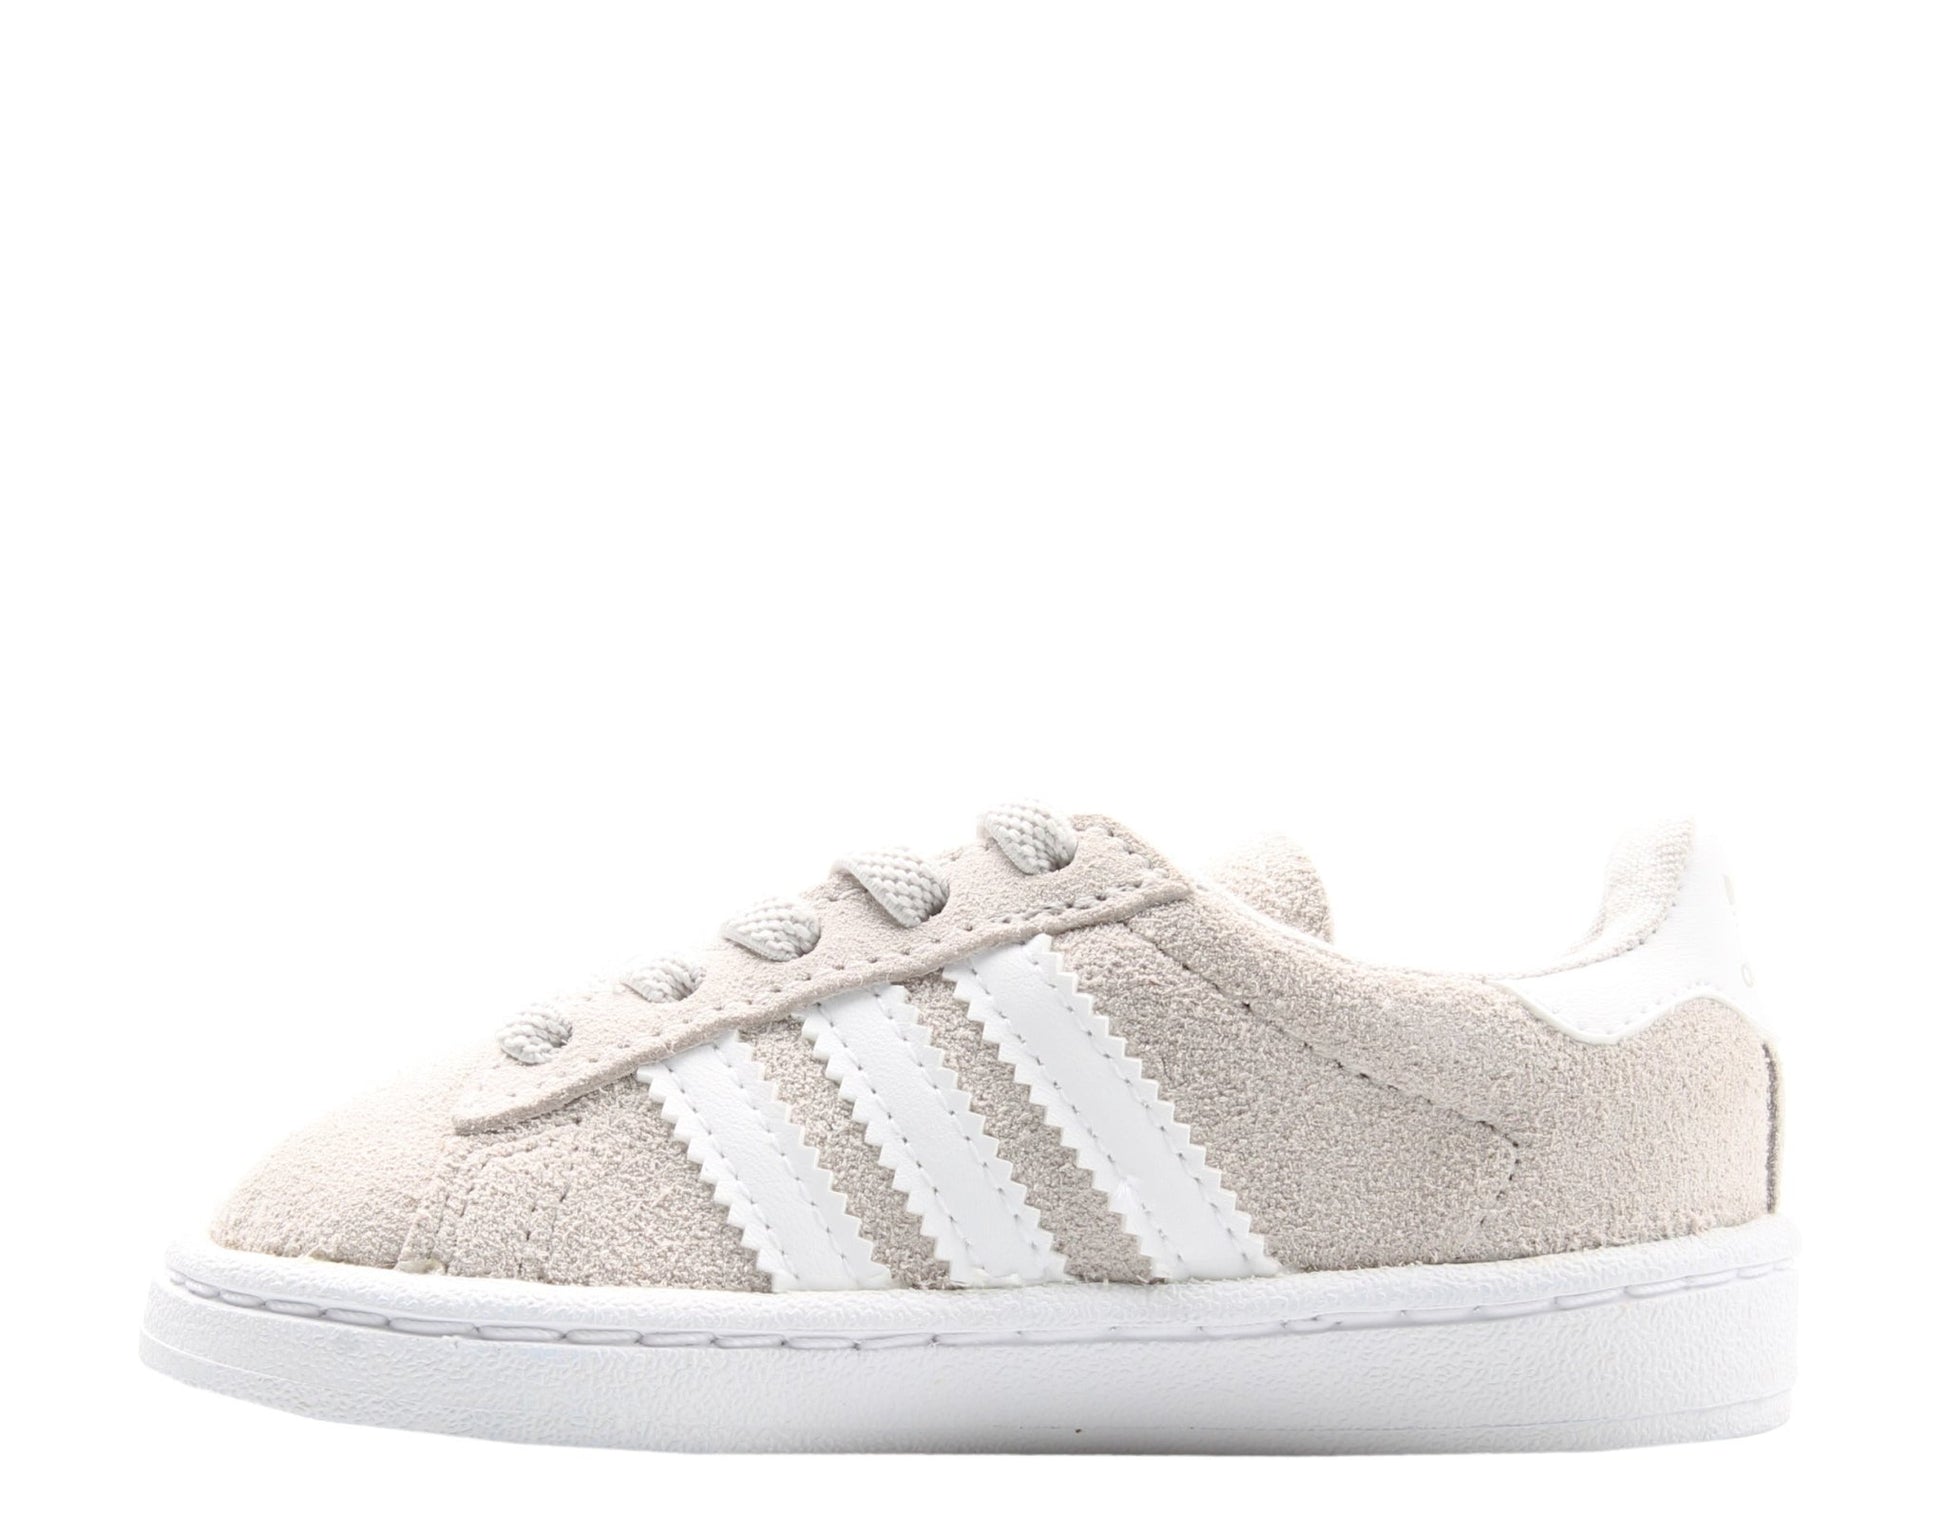 Adidas Originals Campus EL I Infant Grey/White Little Kids Casual Shoes BY9595 - Becauze